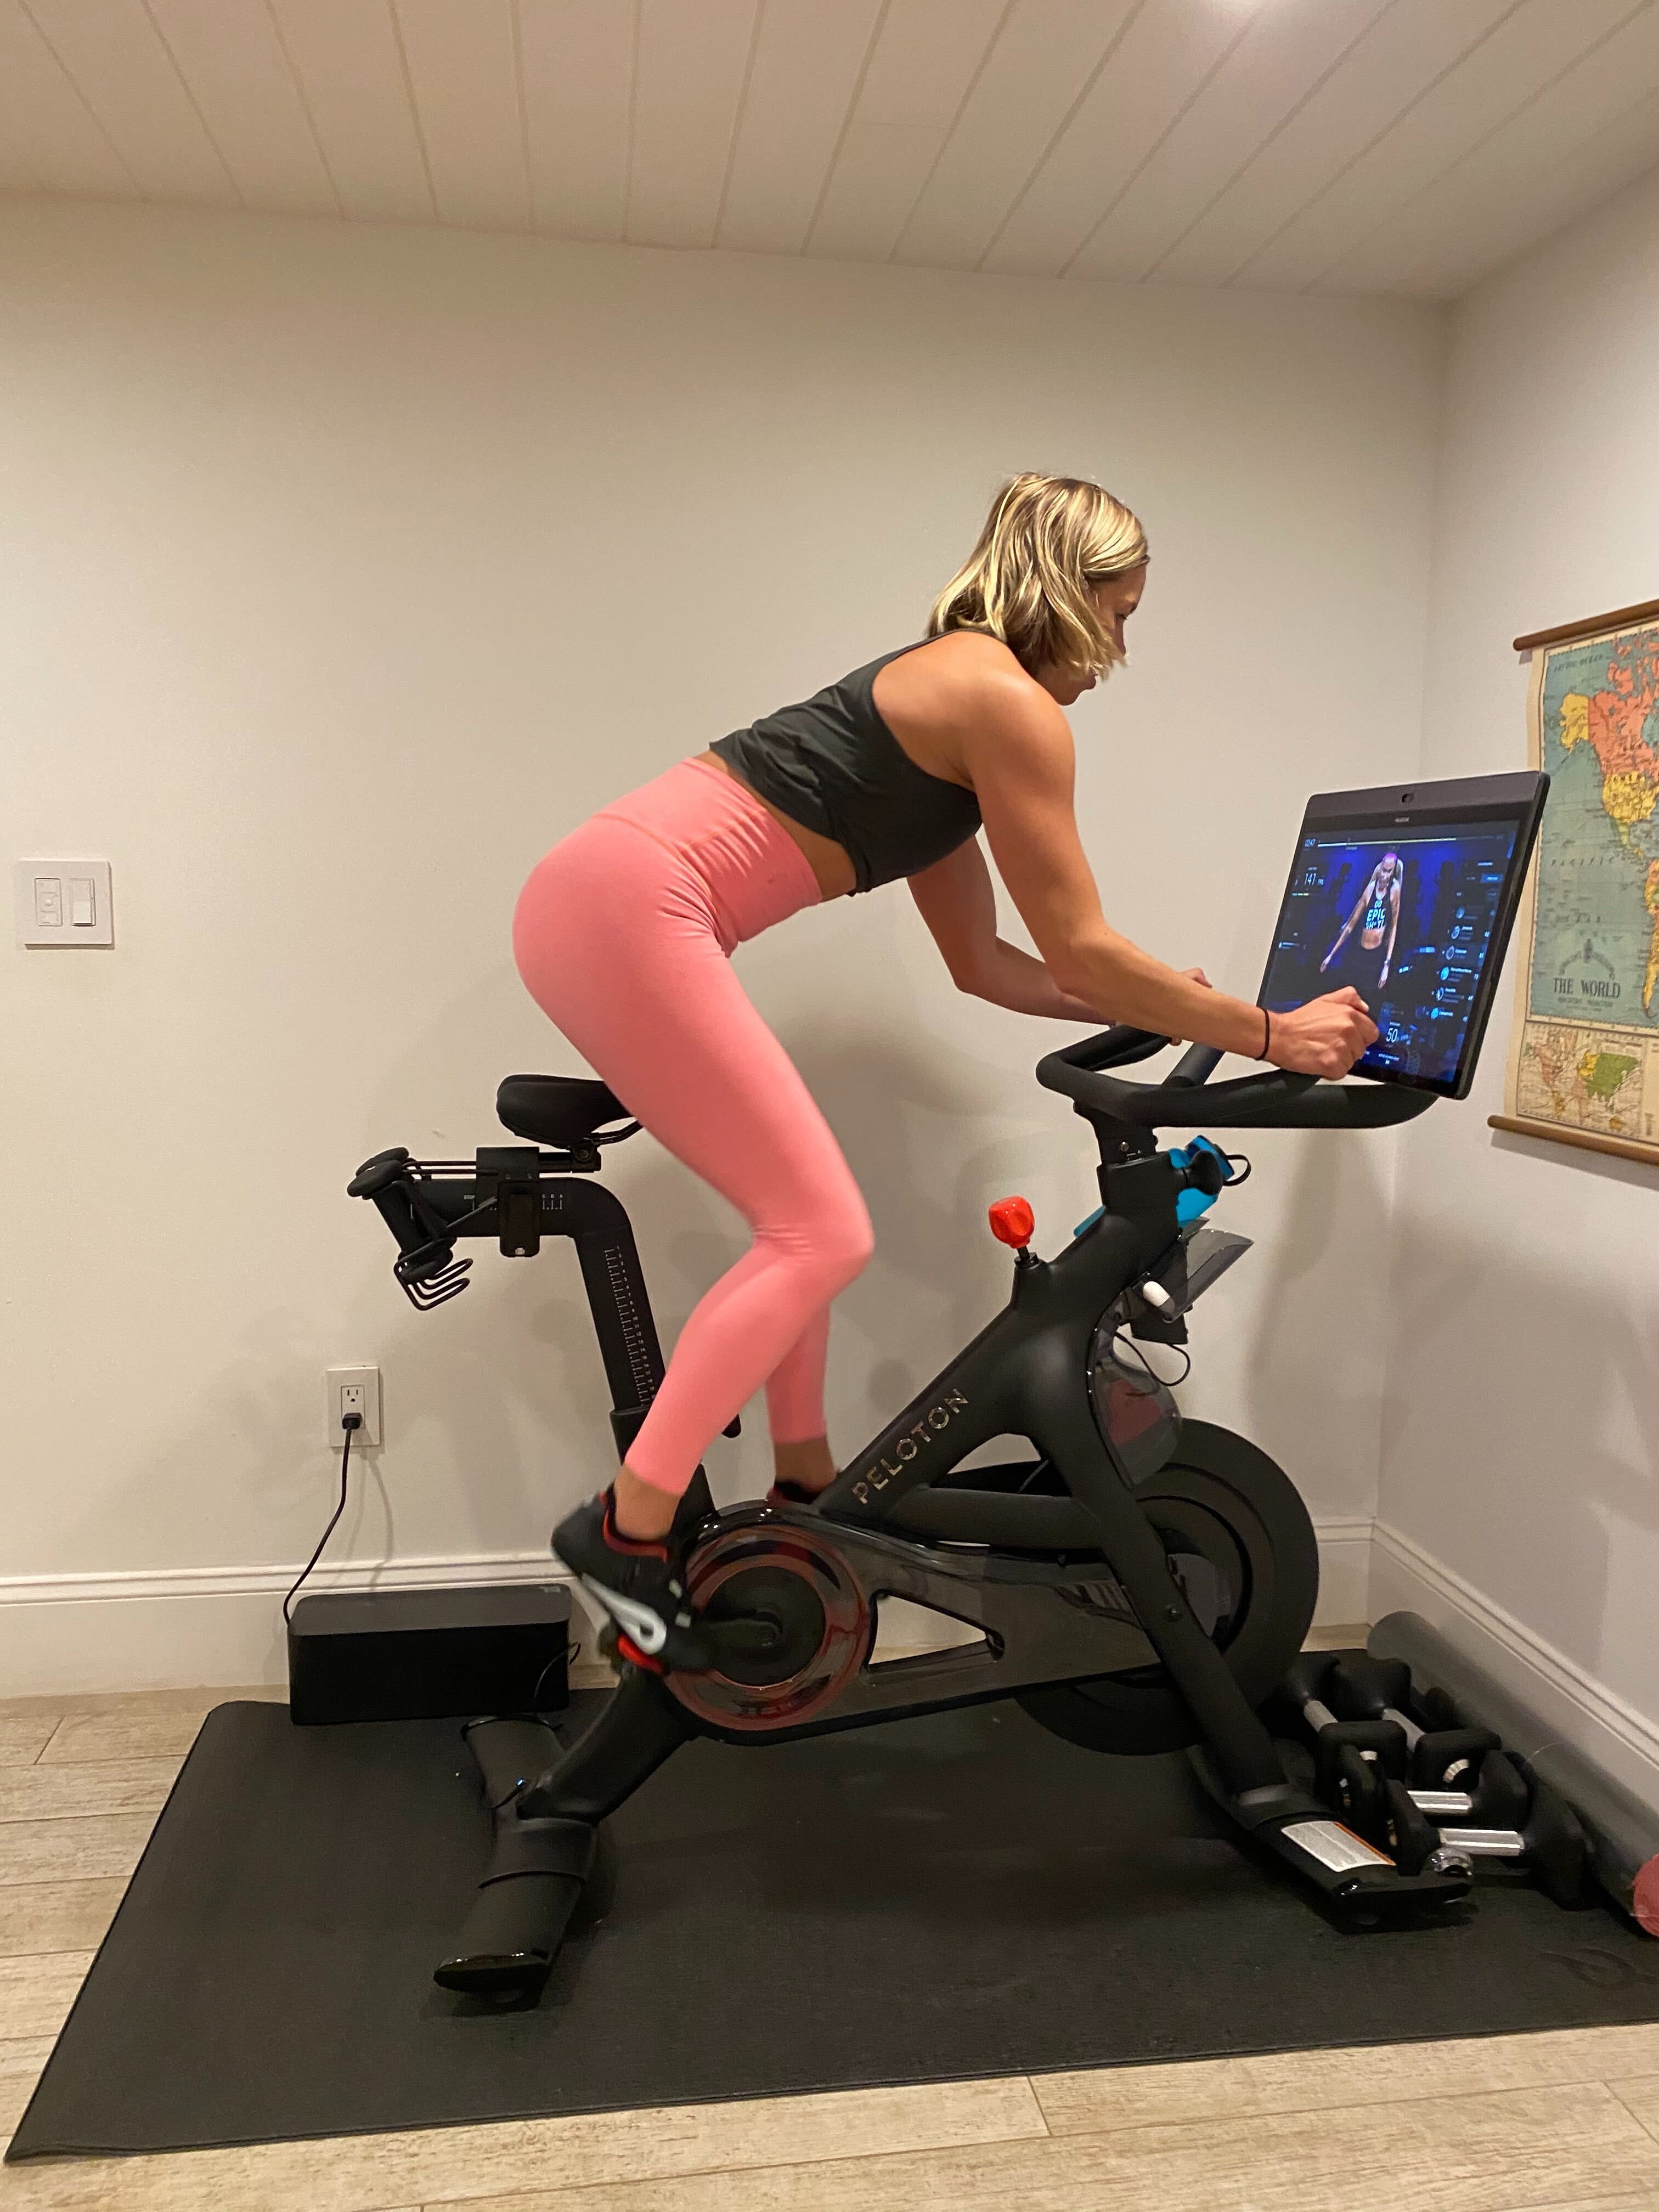 5 Day Who Buys Peloton Bikes for Weight Loss